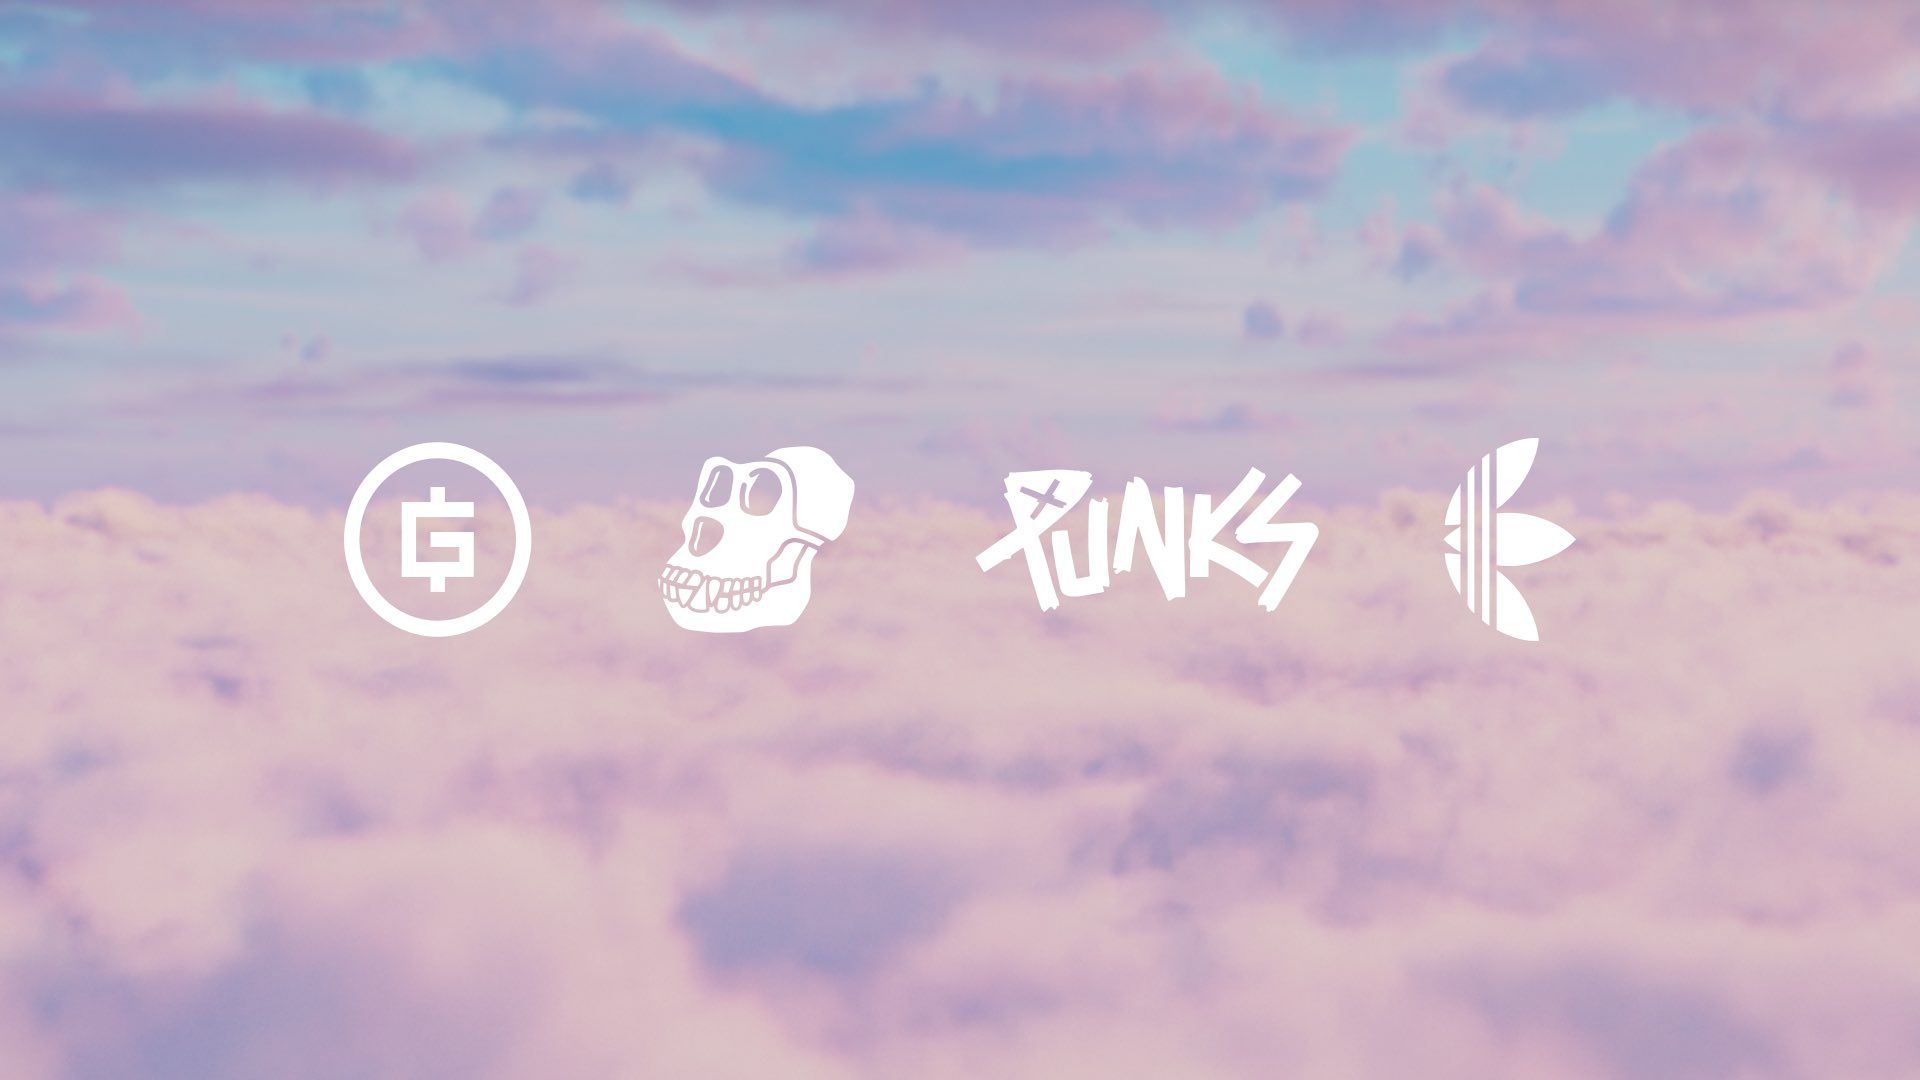 Above the clouds, a photo of the F5 logo, a skull, the Funks logo, and the Adidas logo. - Adidas